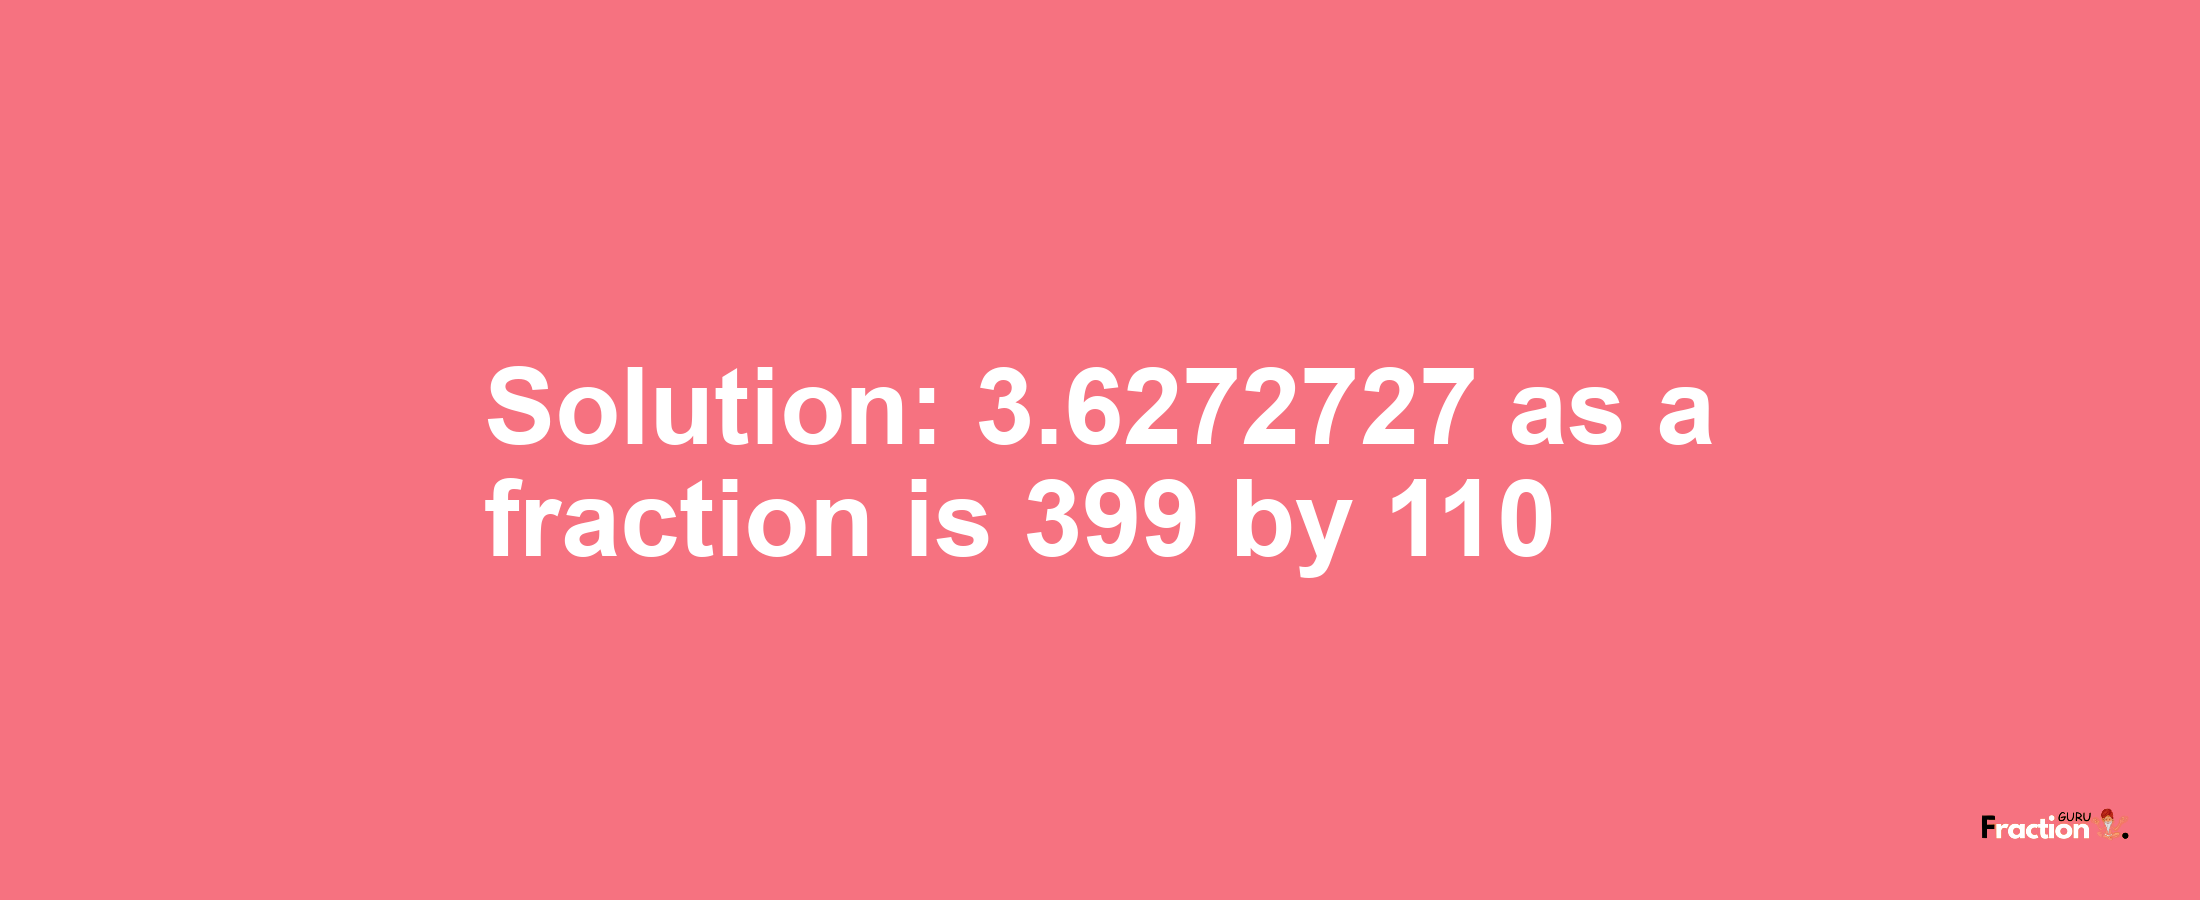 Solution:3.6272727 as a fraction is 399/110